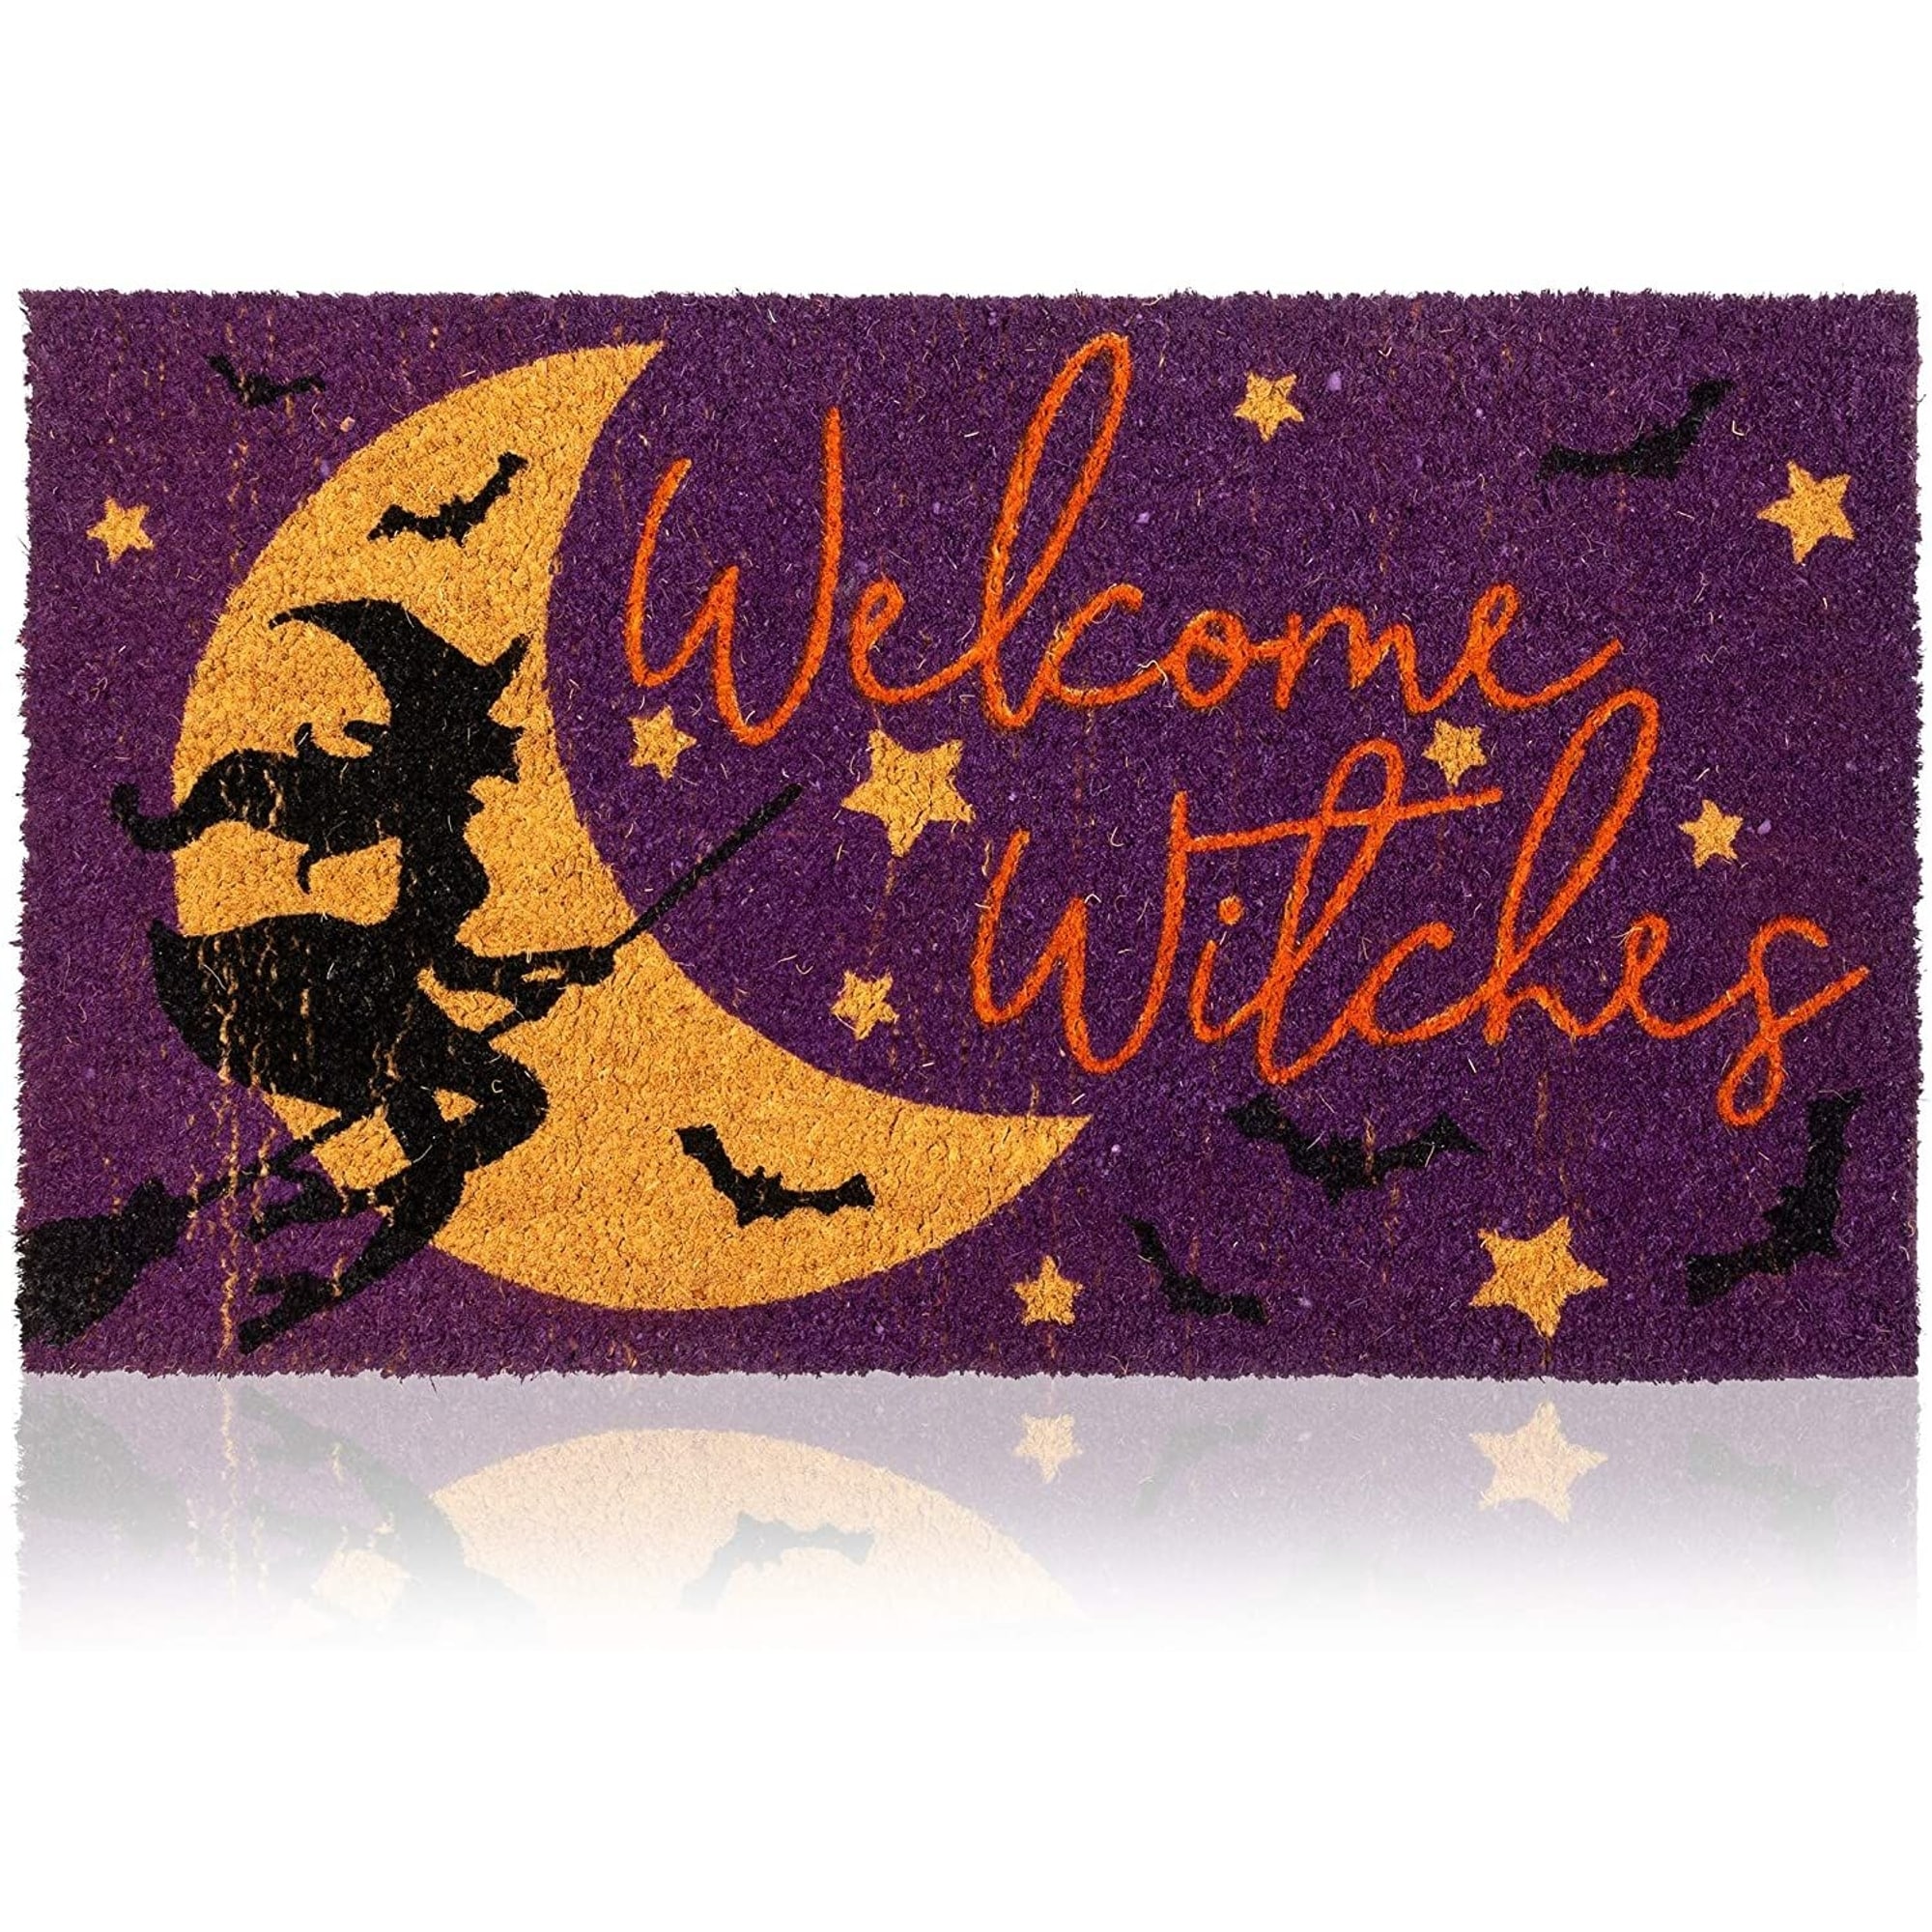 https://ak1.ostkcdn.com/images/products/is/images/direct/d7d0443856c6525247dcee01ca660ca54094a55f/Halloween-Coco-Coir-Door-Mat%2C-Welcome-Witches-%2830-x-17-inches%29.jpg